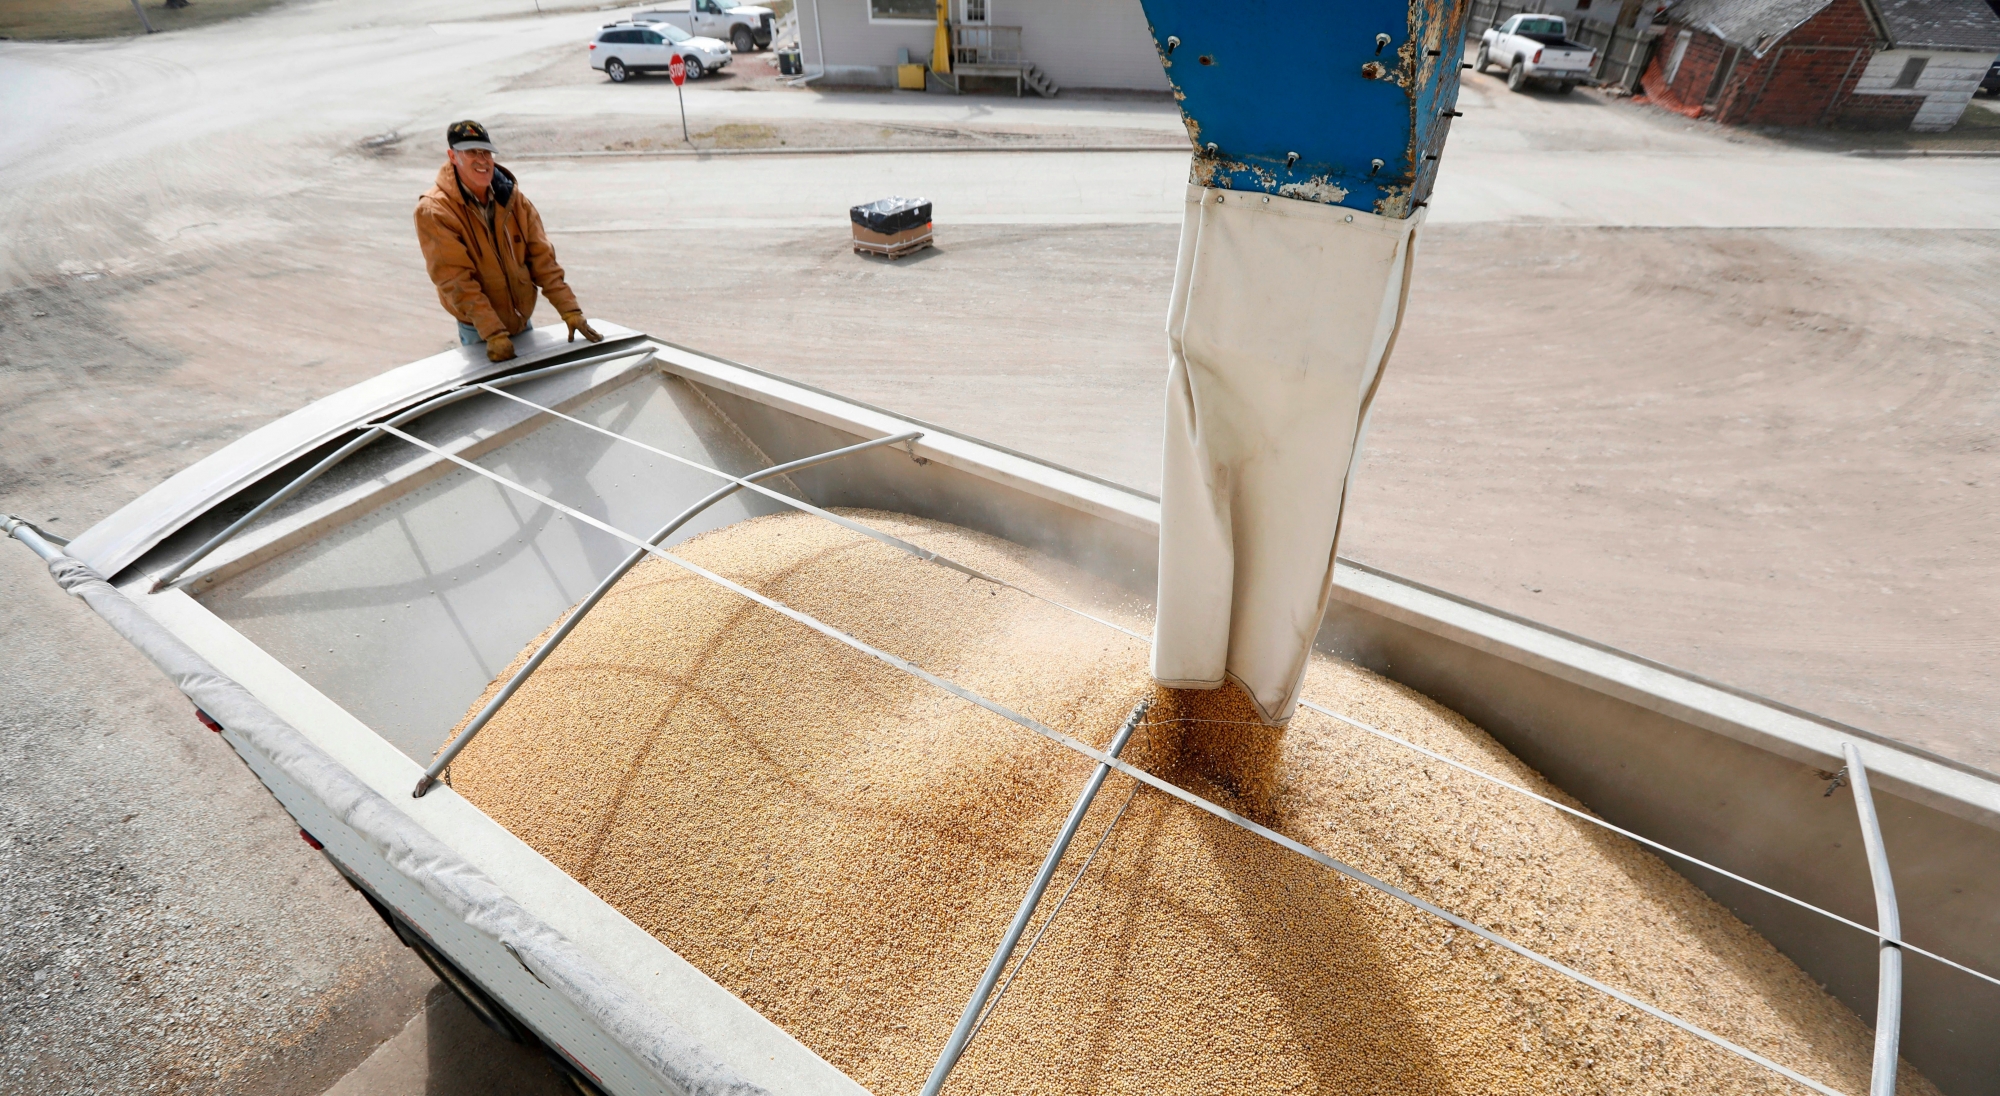 FILE - In this Thursday, April 5, 2018 file photo, Terry Morrison of Earlham, Iowa, watches as soybeans are loaded into his trailer at the Heartland Co-op,, in Redfield, Iowa. The U.S. Department of Agriculture says it must delay the release of key crop reports due to the partial government shutdown. The announcement Friday, Jan. 4, 2019, left investors and farmers without vital information during an already tumultuous time for agricultural markets. The USDA planned to release the reports Jan. 11 but said that even if the shutdown ended immediately, the agency wouldn't have time to release the reports as scheduled. (AP Photo/Charlie Neibergall, File) Government Shutdown Agriculture